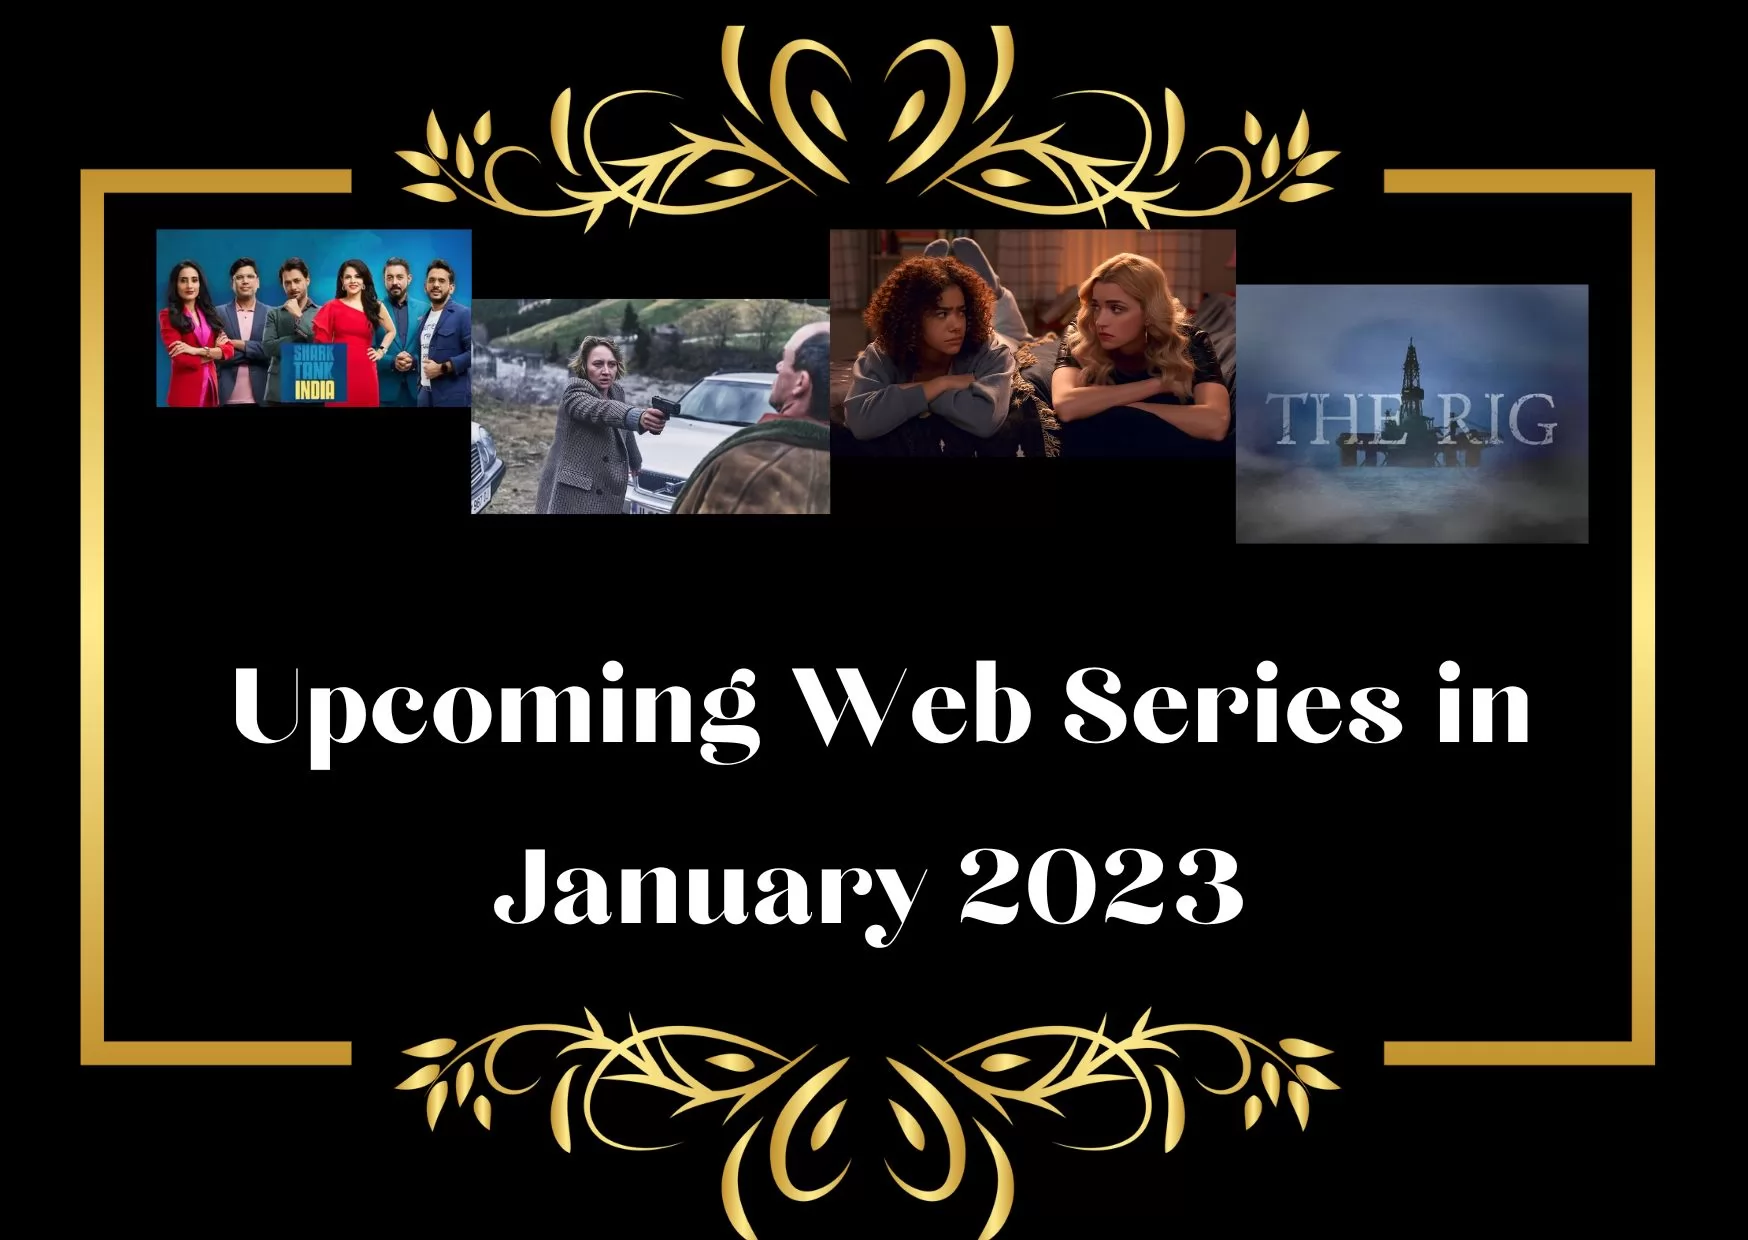  Upcoming Web Series in January 2023